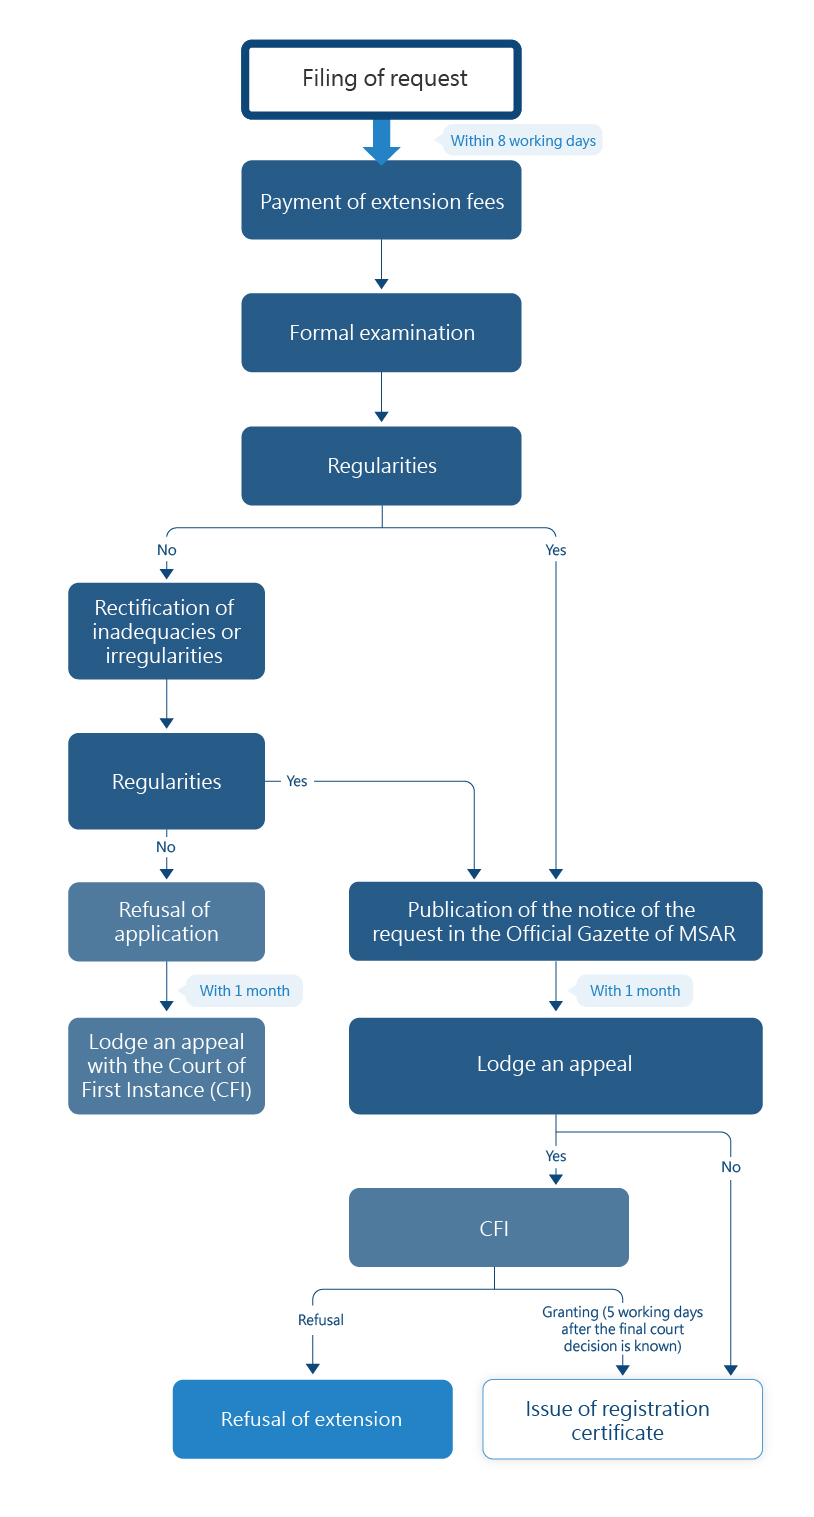 Flowchart of Application Process for Extension of Invention Patent from the China National Intellectual Property Administration